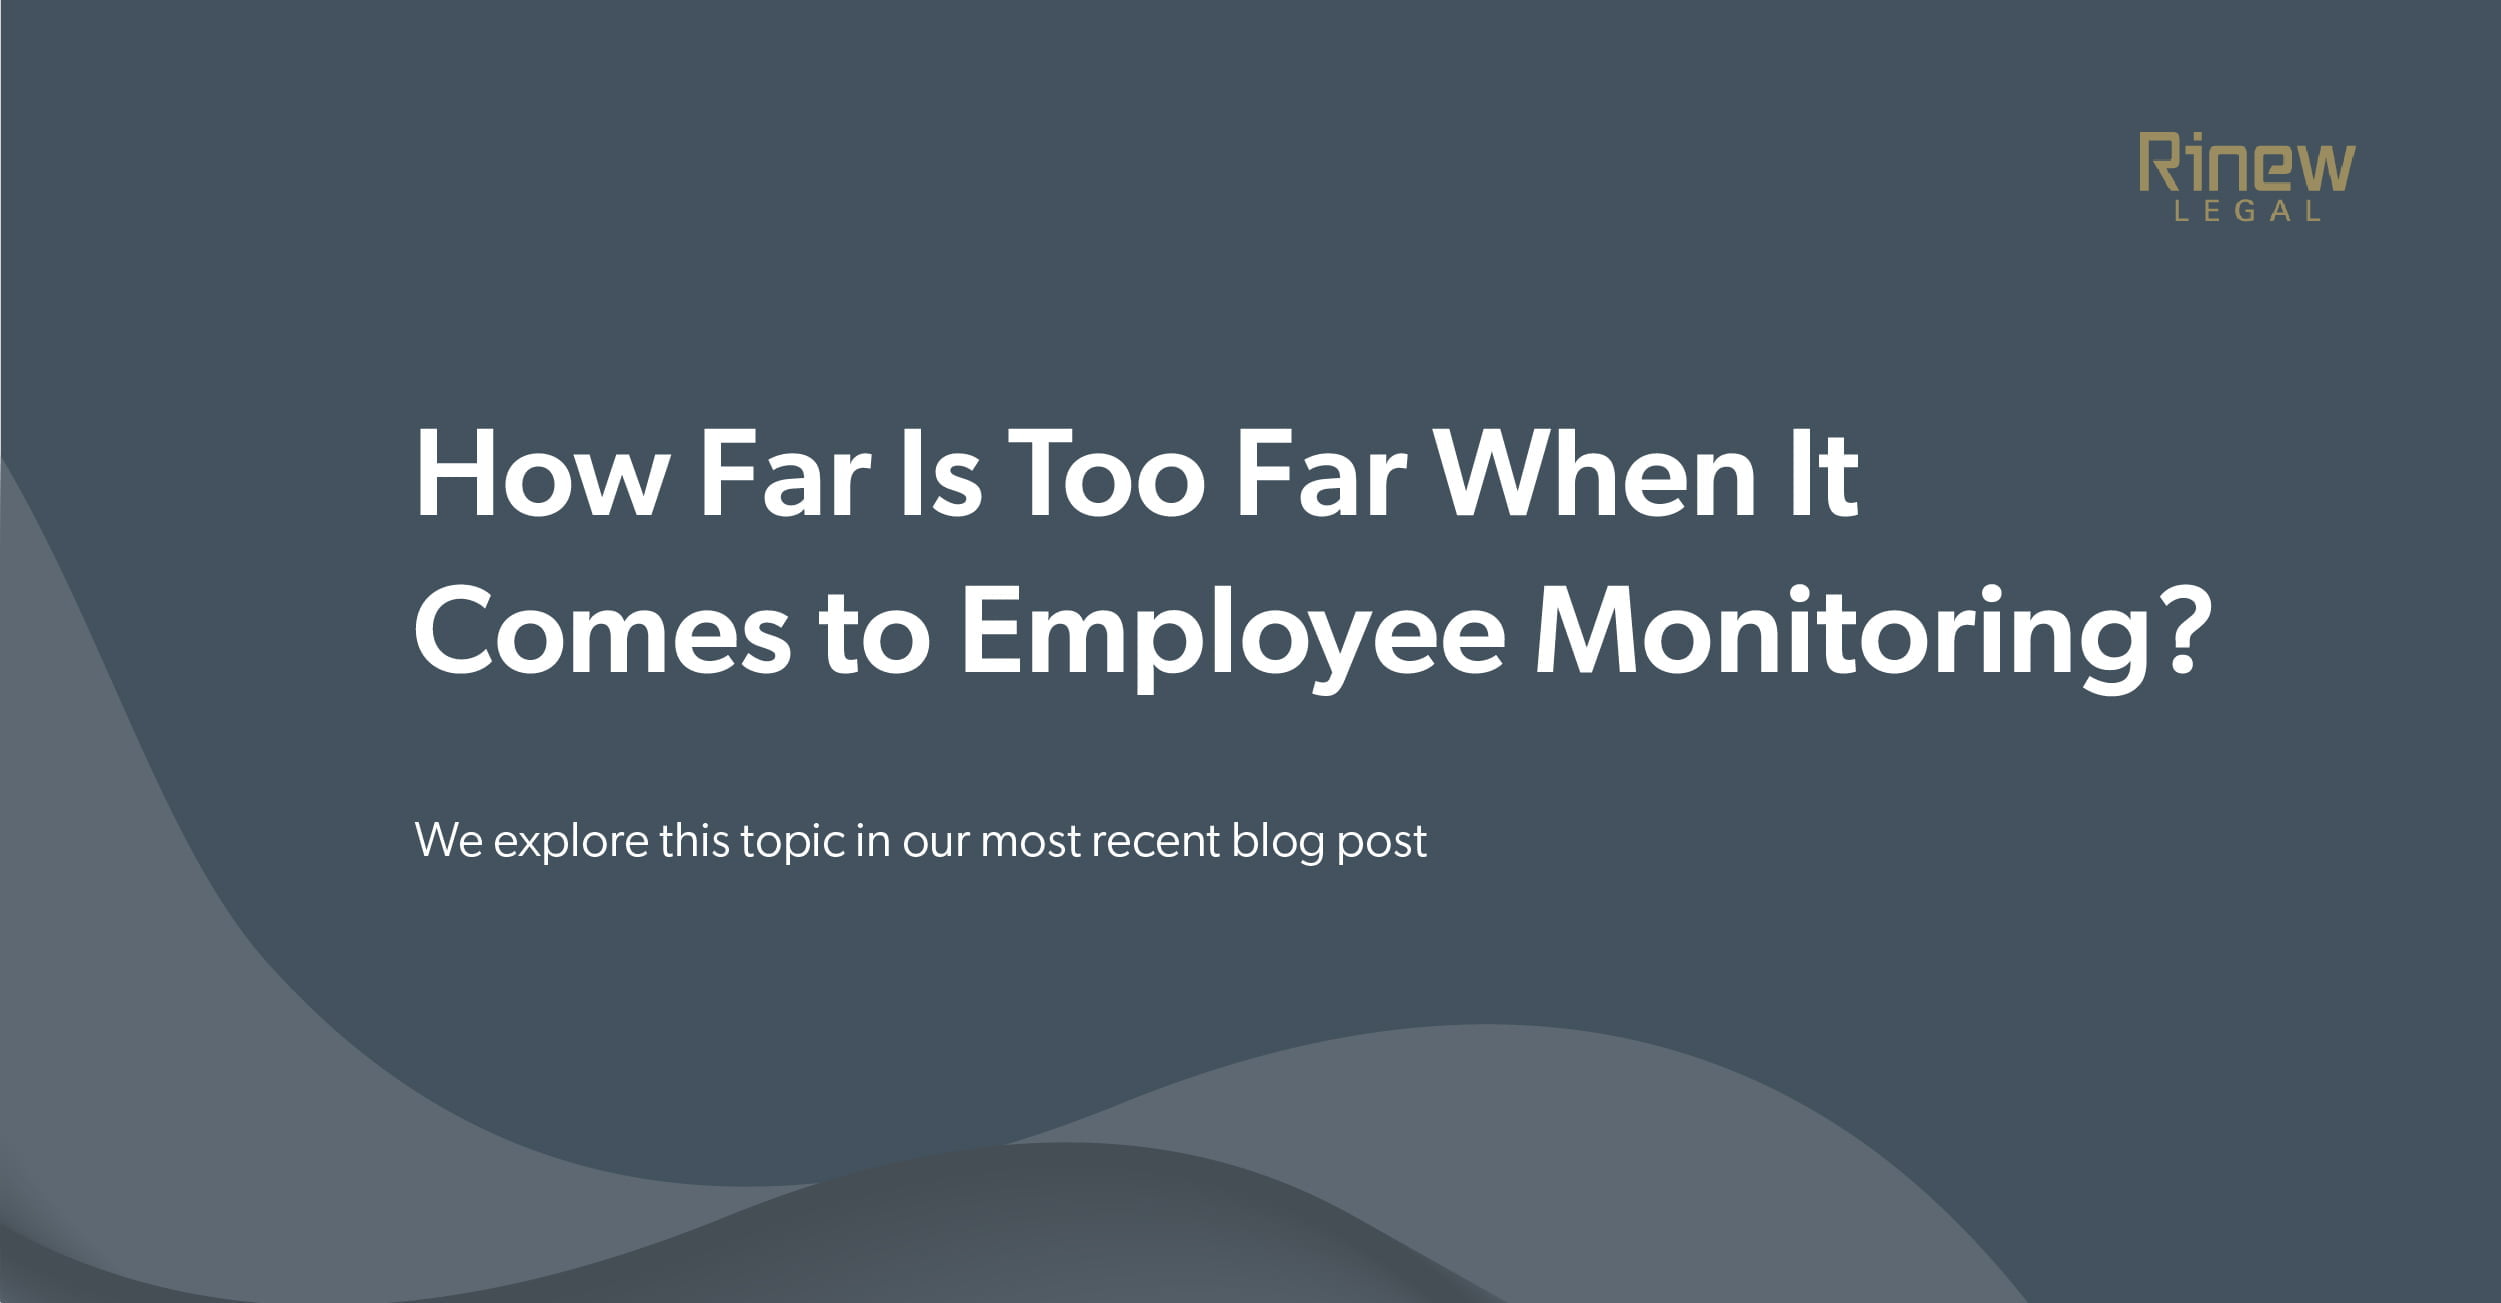 Featured image for “HOW FAR IS TOO FAR WHEN IT COMES TO EMPLOYEE MONITORING?”